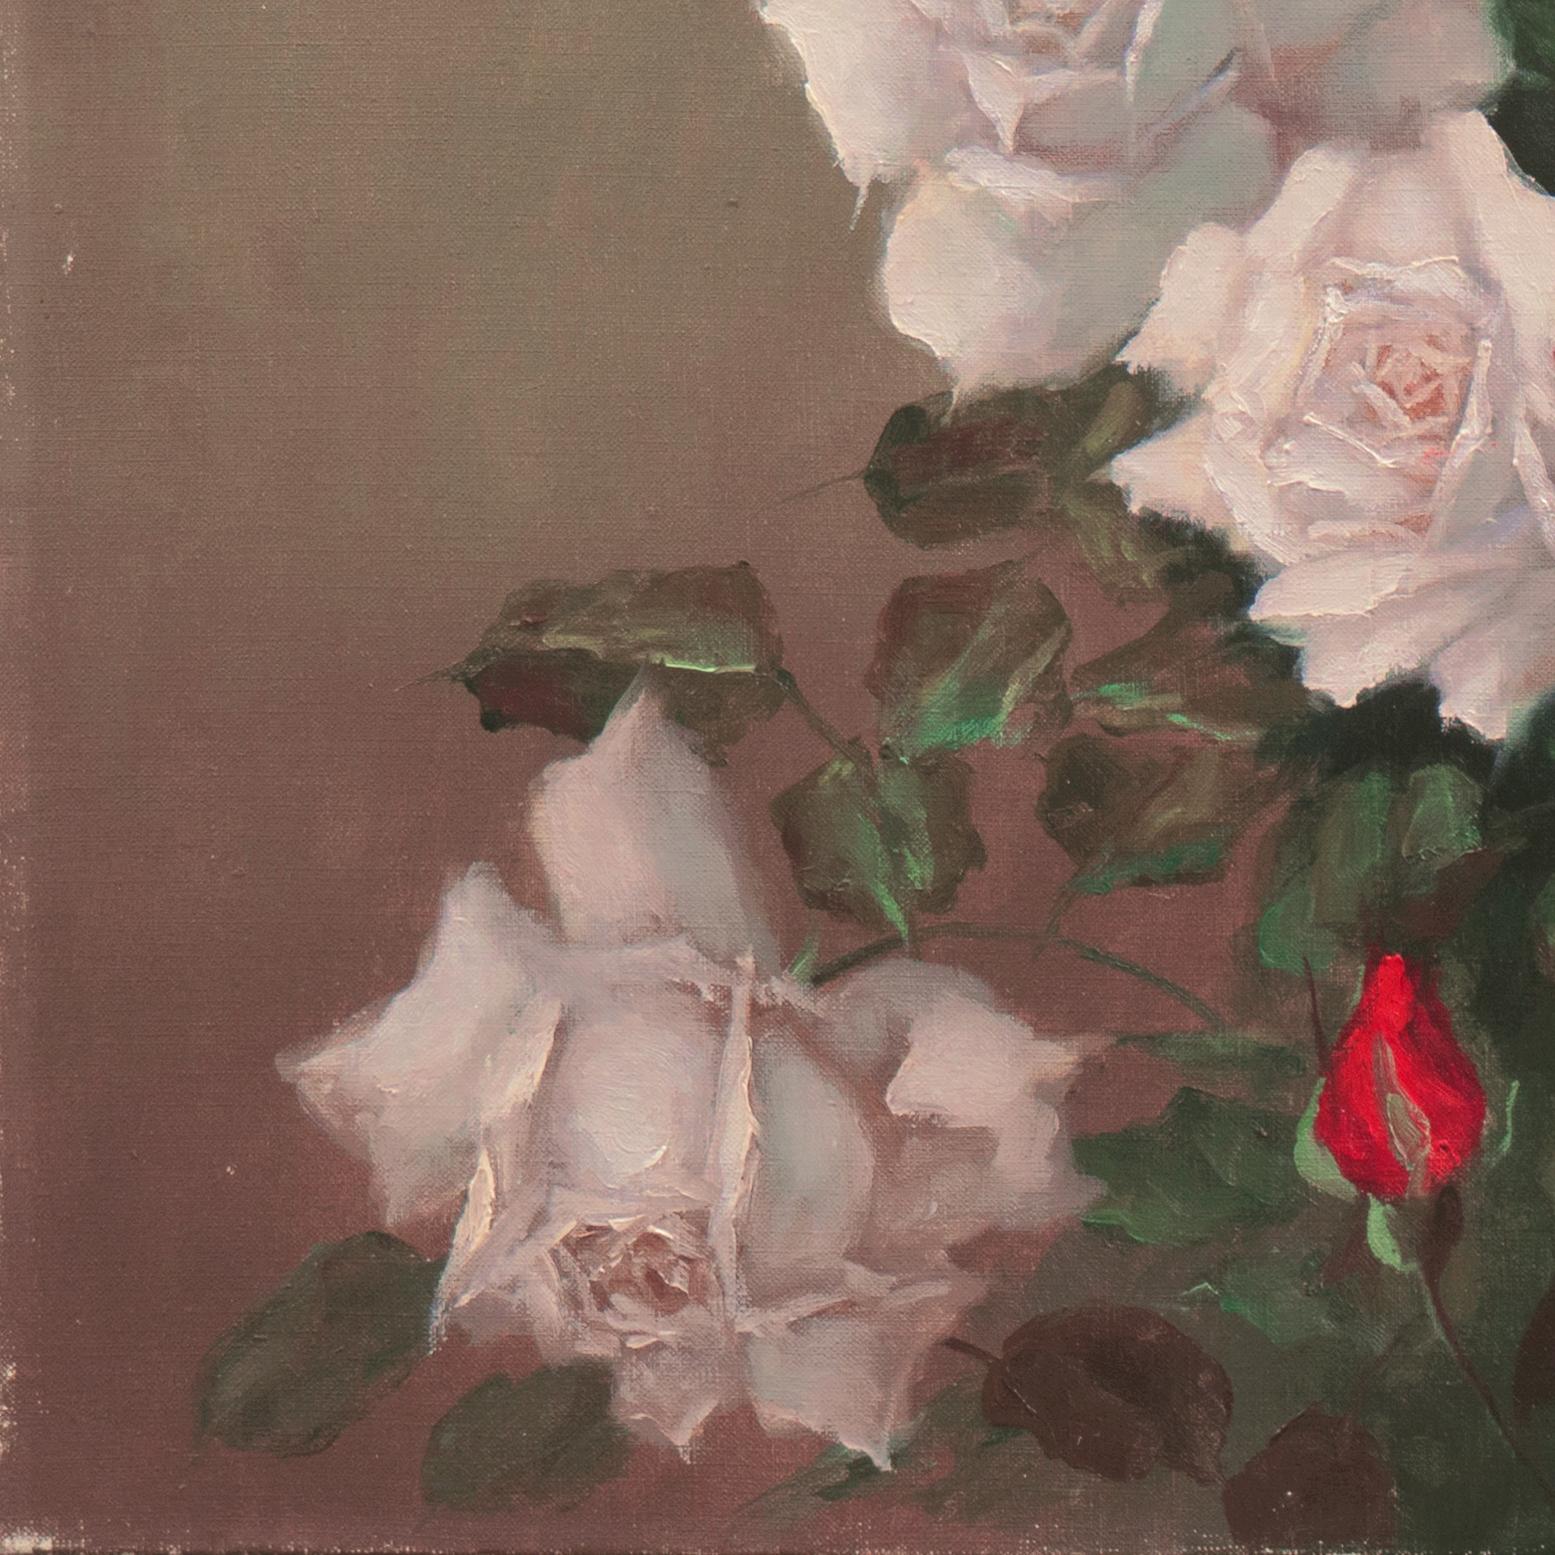 'Red and White Roses', Horticultural, Botanical, Flowers - Painting by 20th century American School